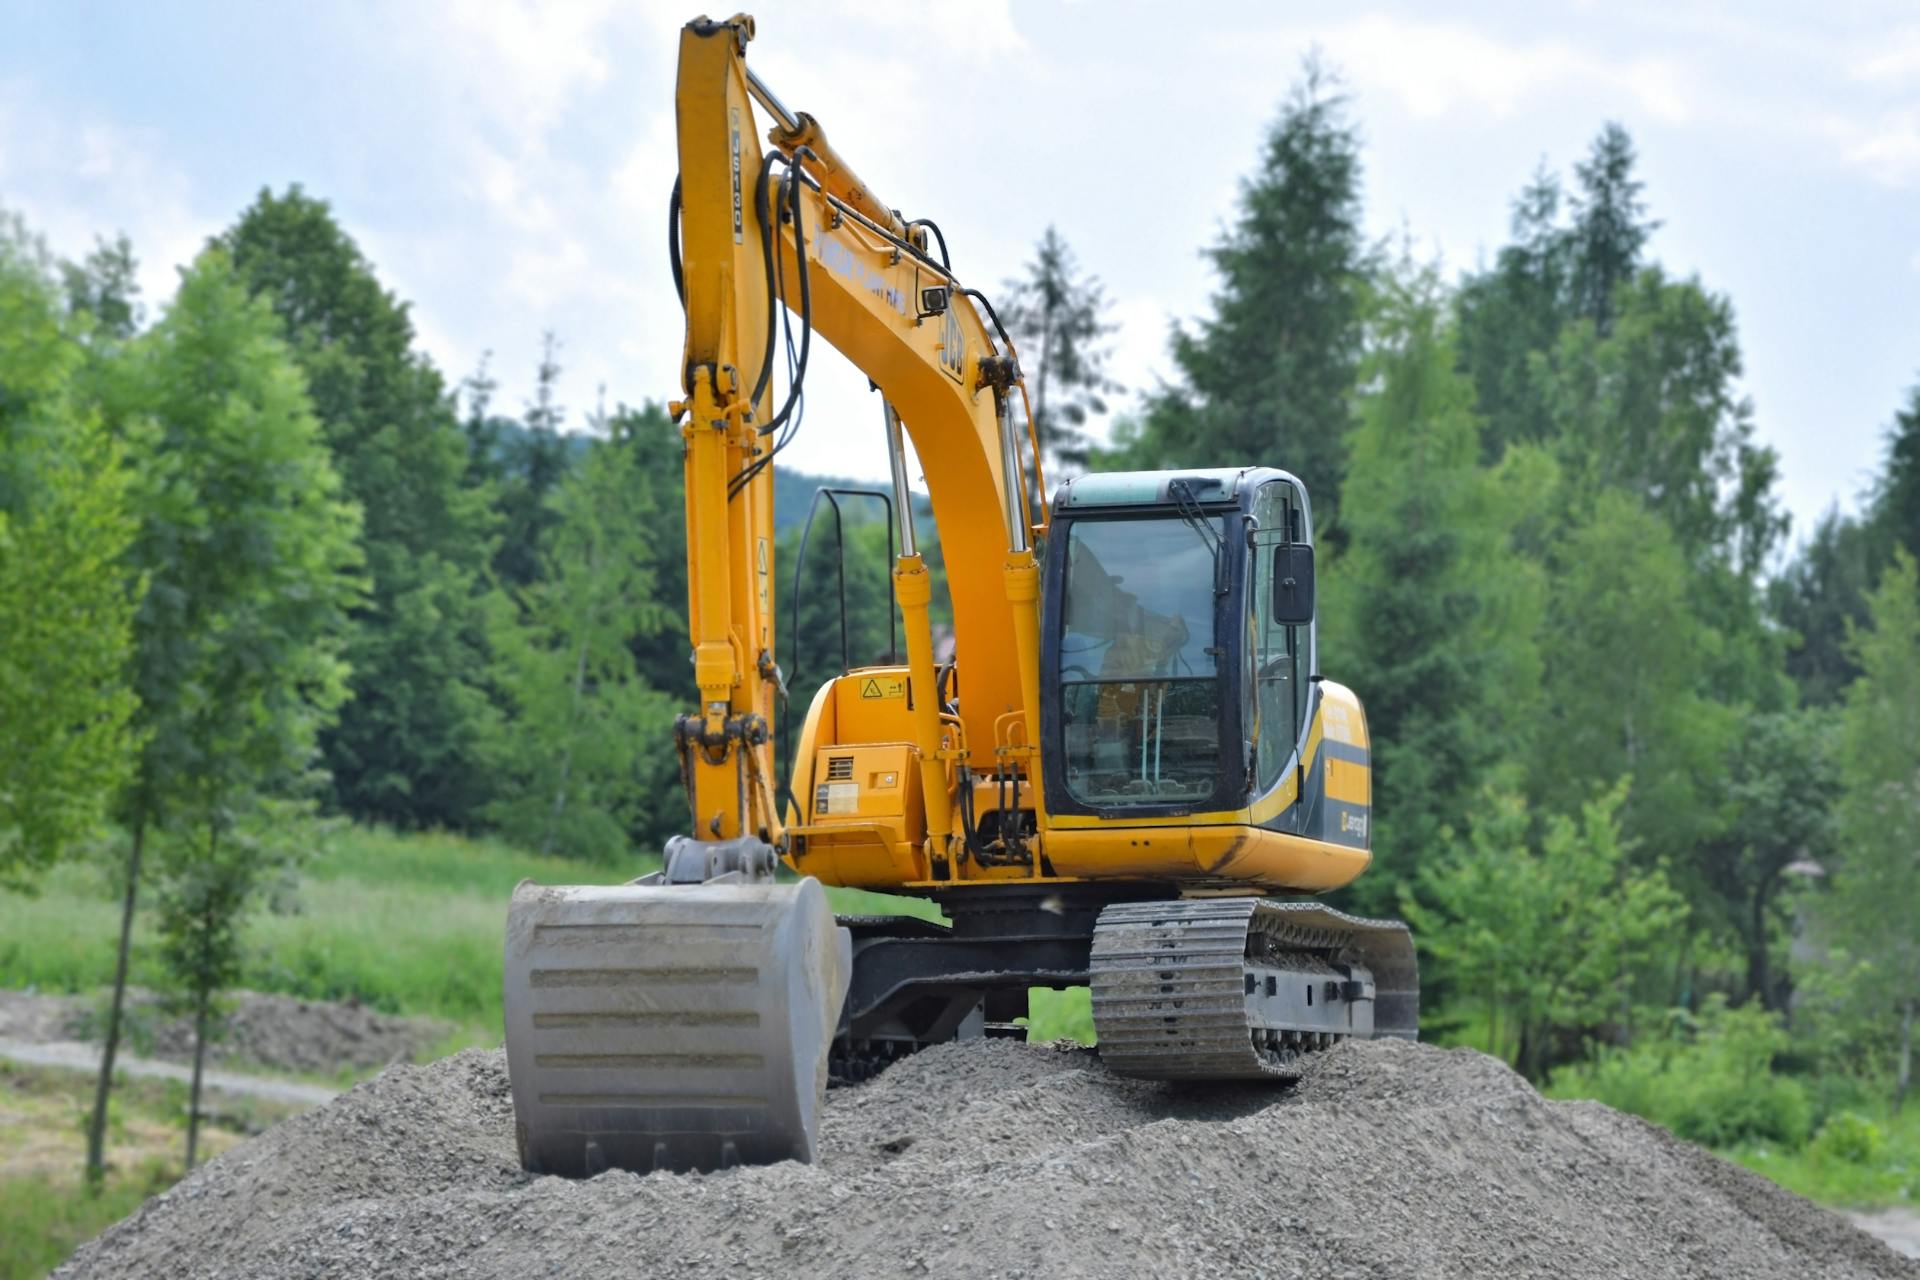 From diesel to daisies: 5 recent innovations in eco-friendly heavy equipment. Photo by PhotoMIX Company on Pexels